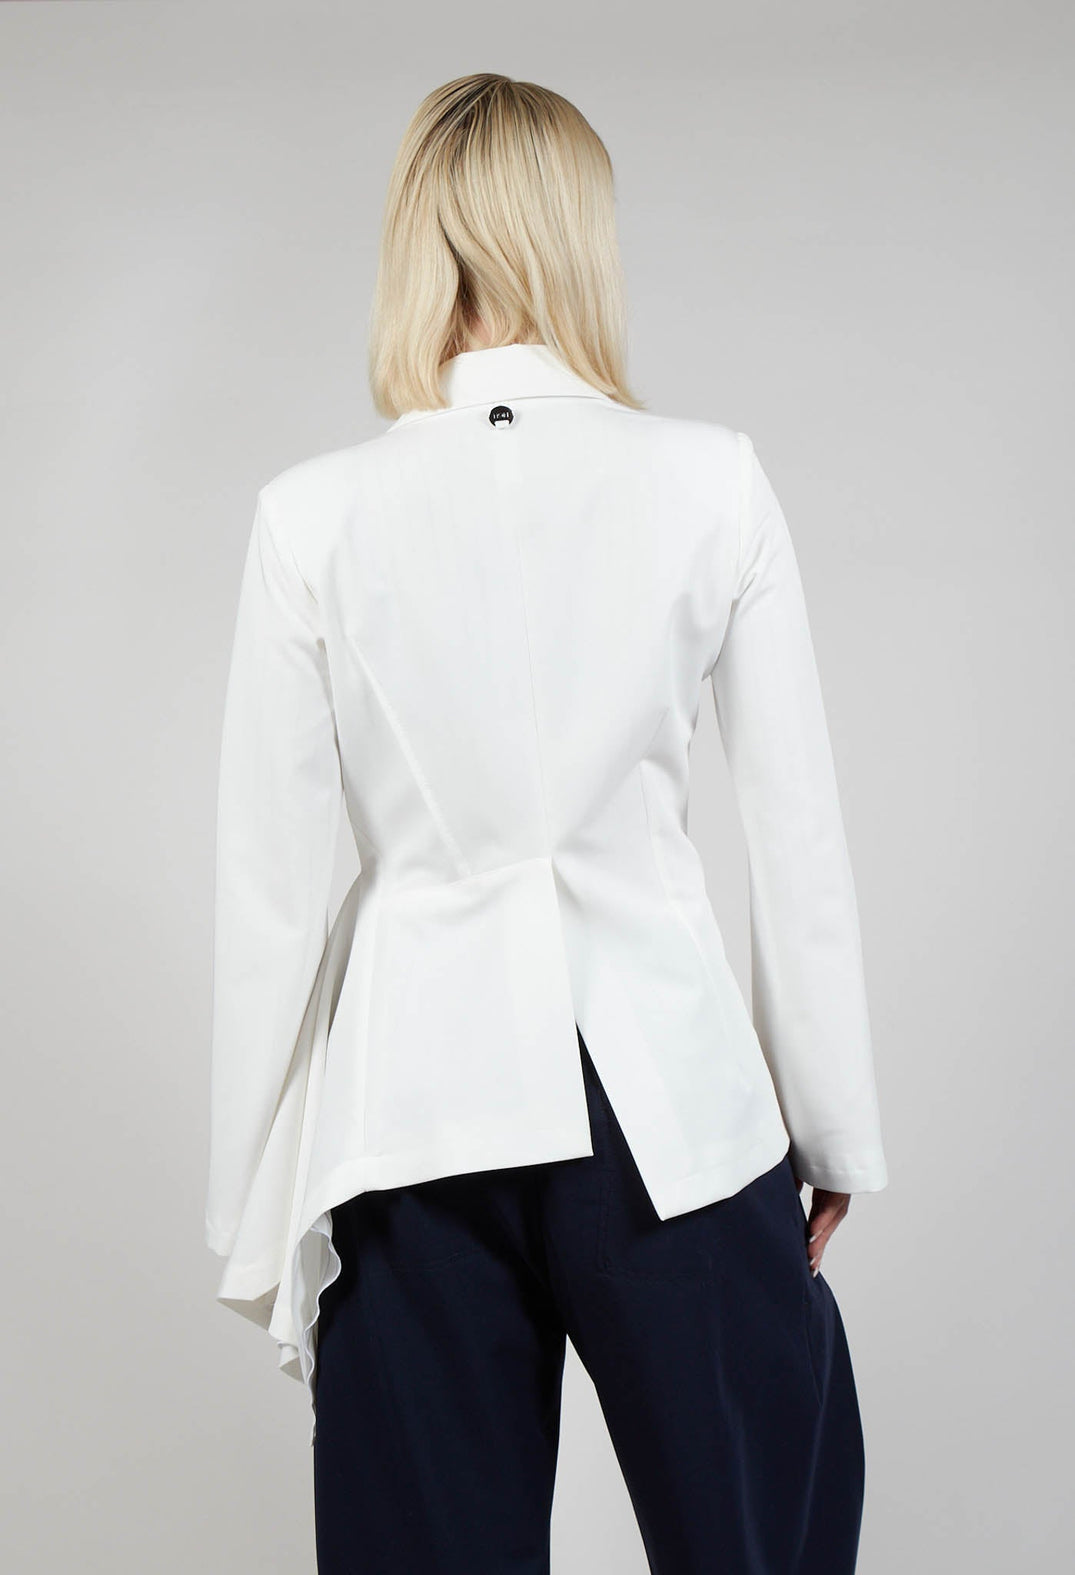 Inspiration Jacket in White